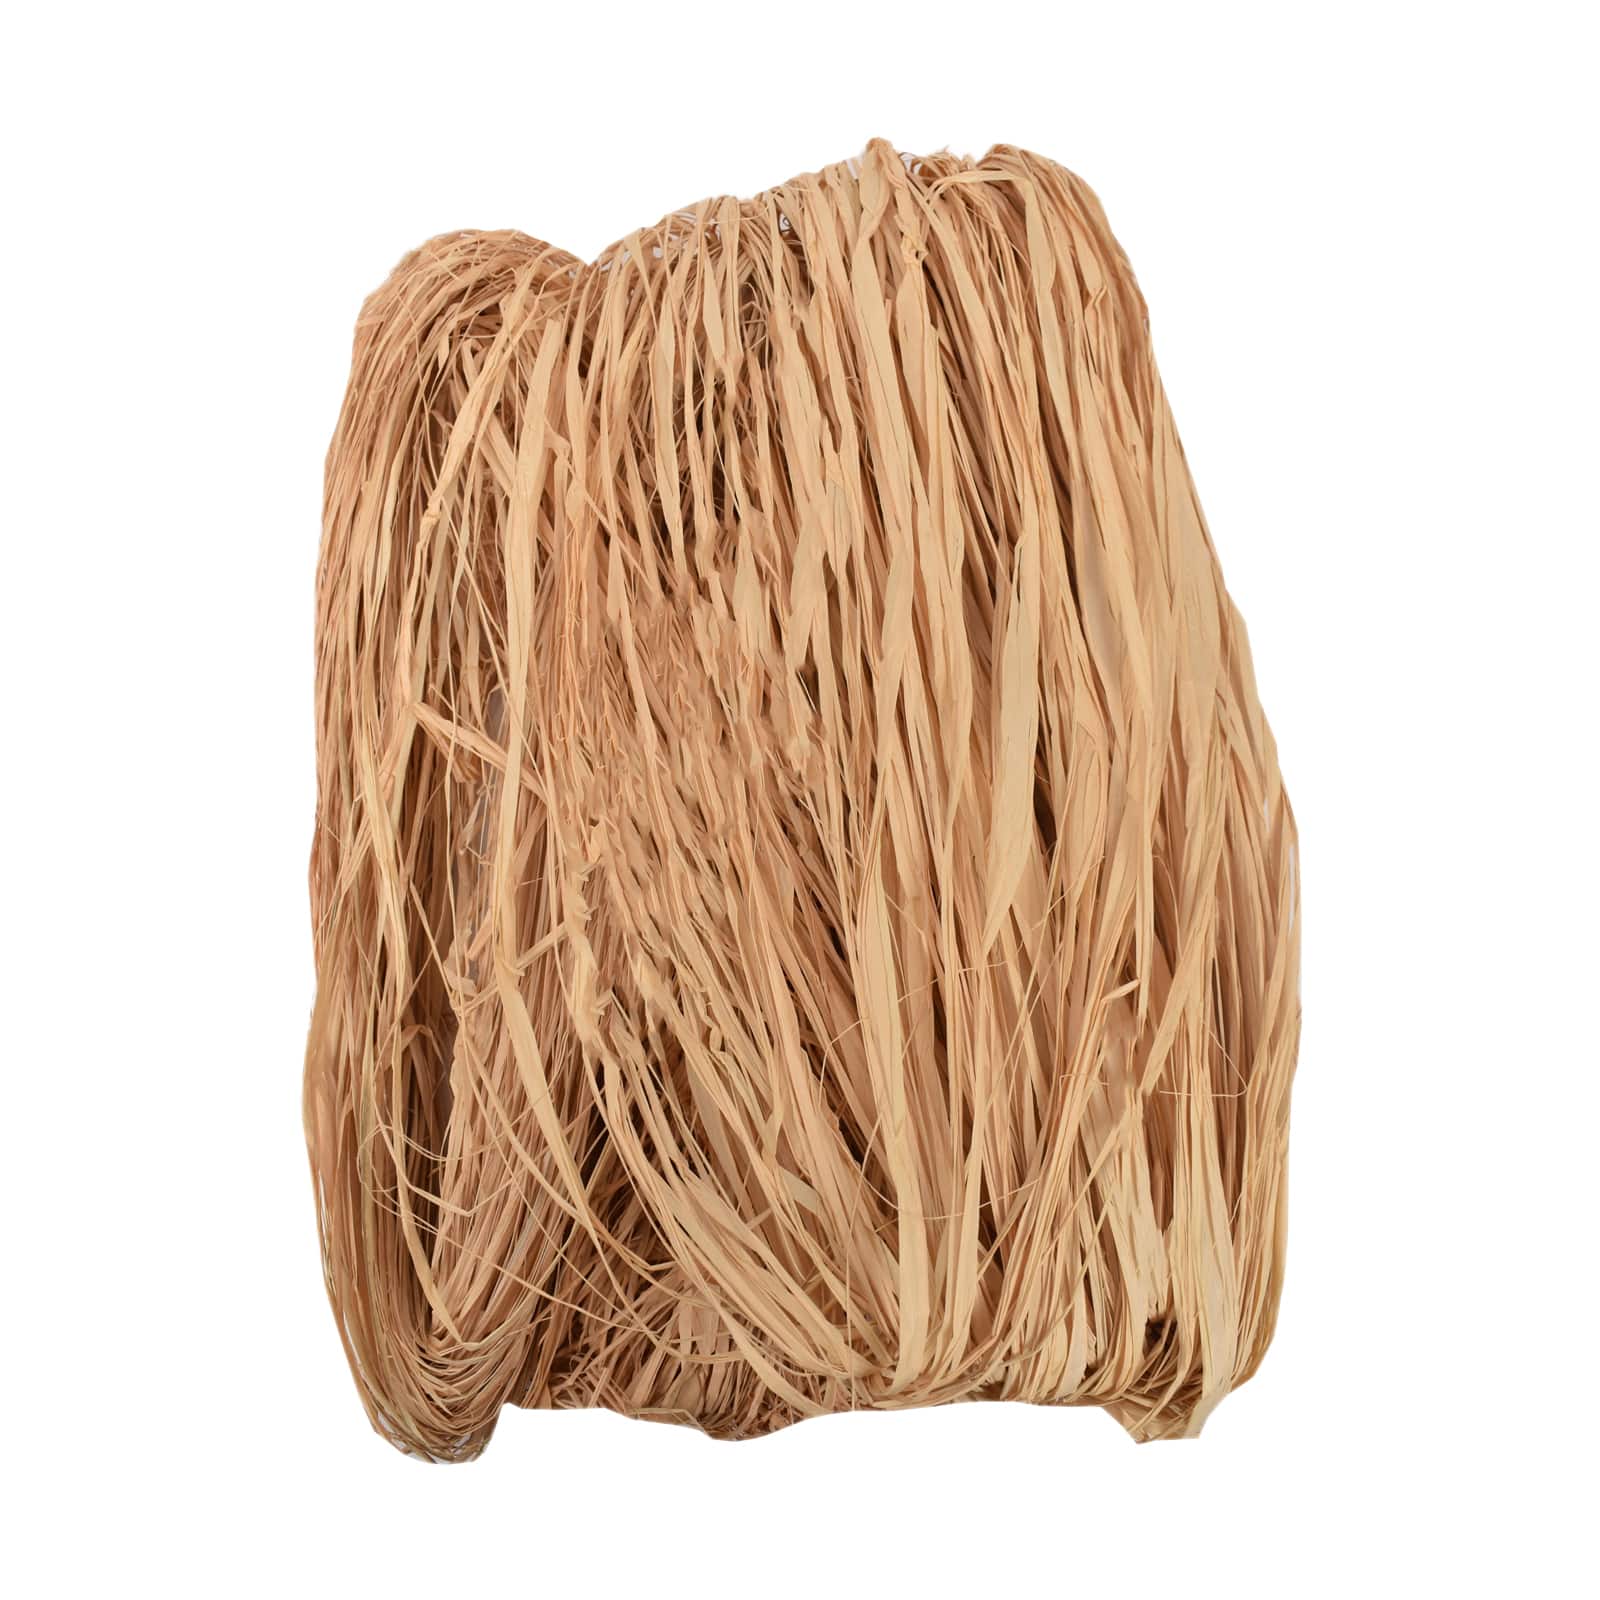 how to work with raffia